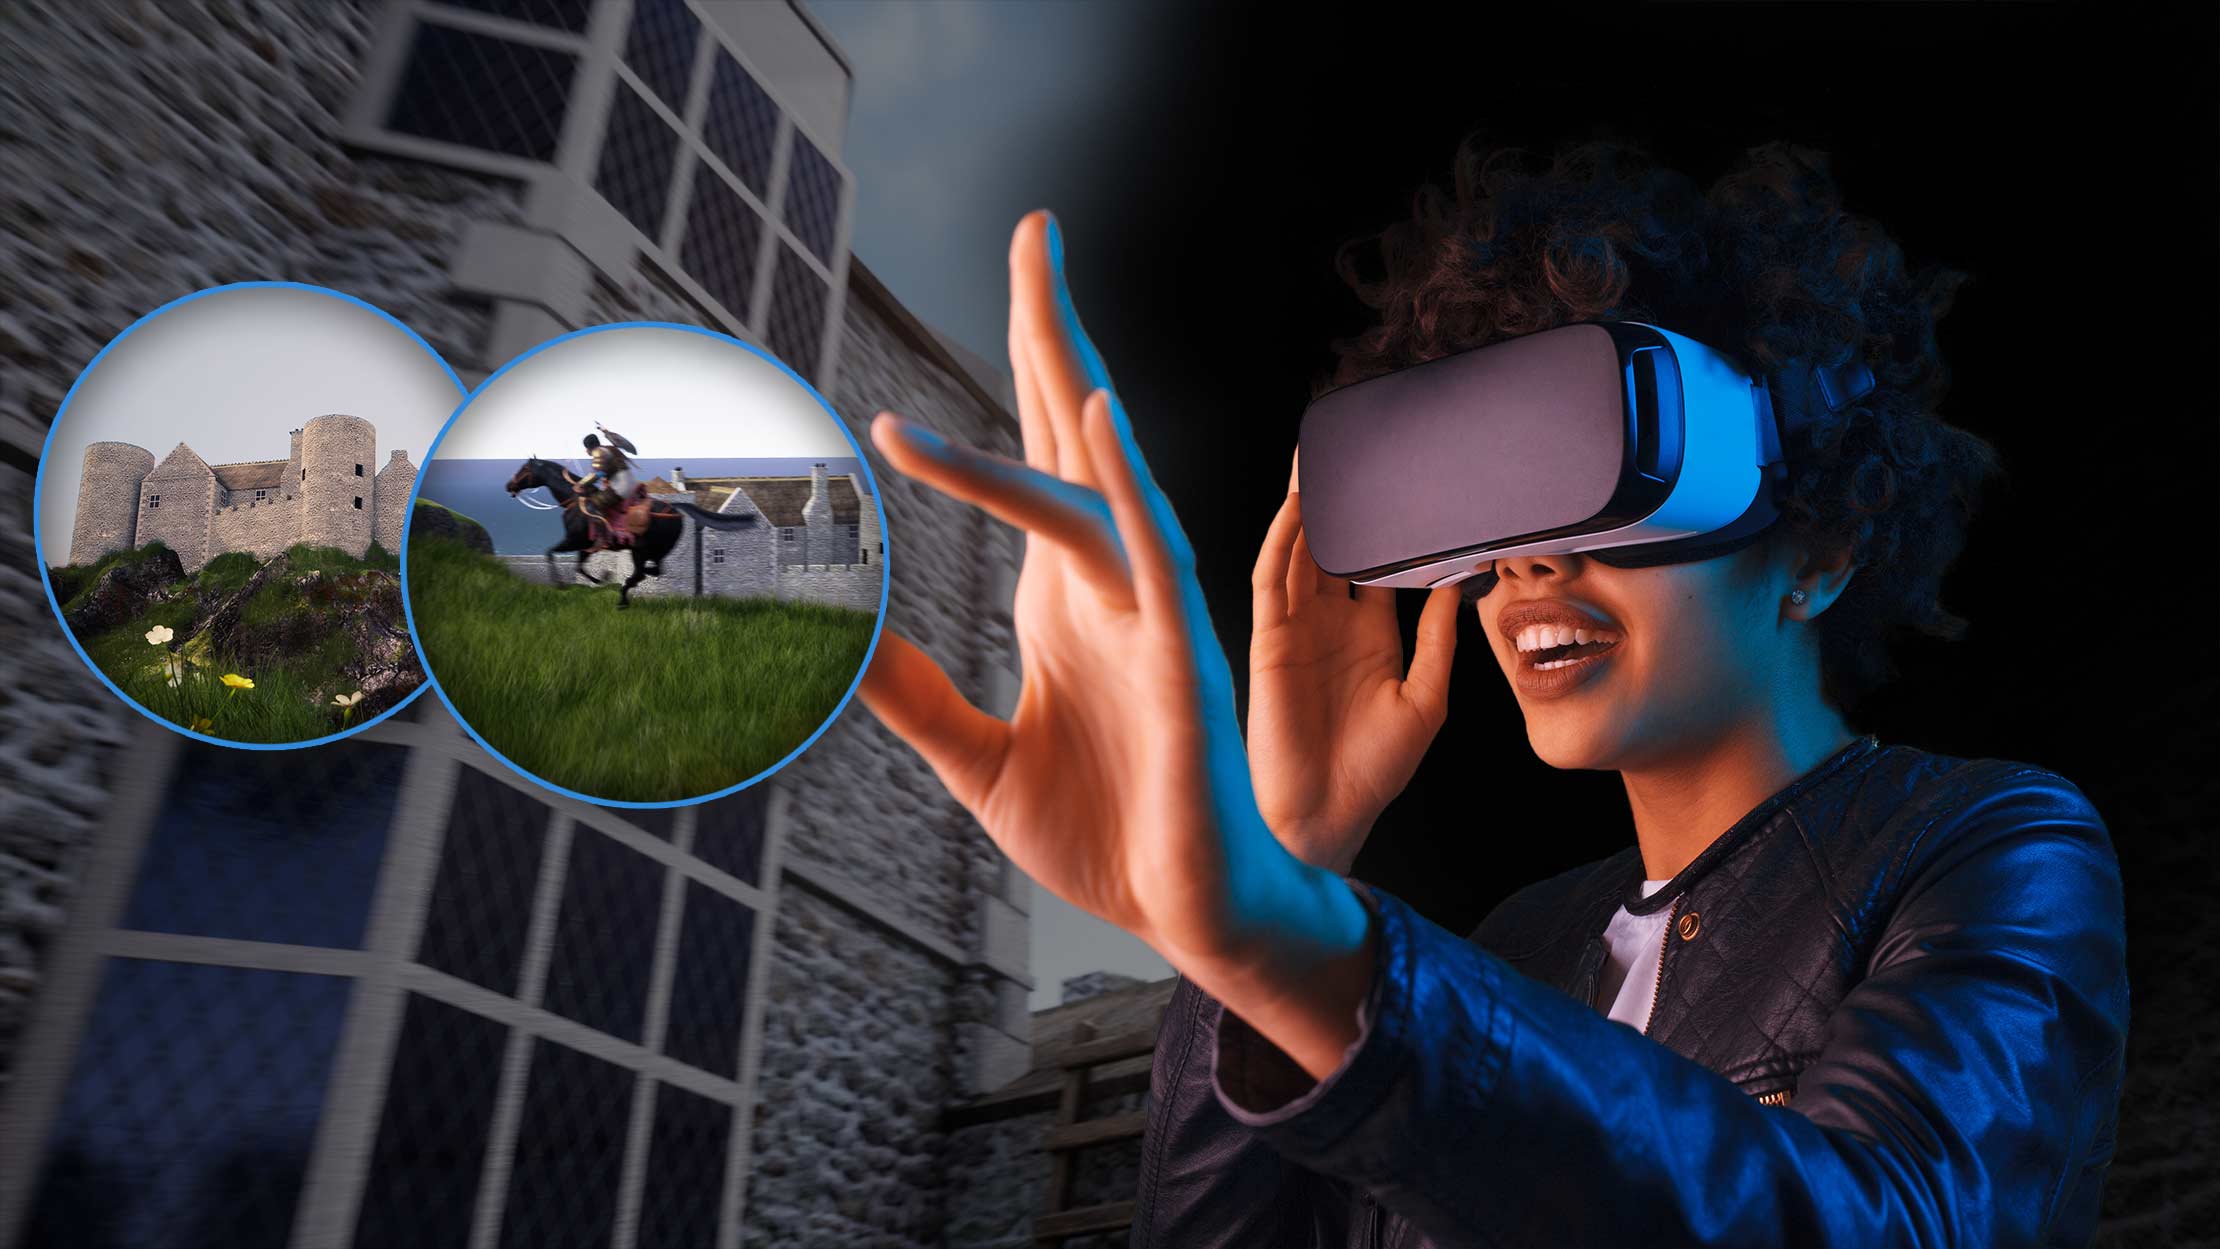 Vision of the Ages - Monumental Virtual Reality